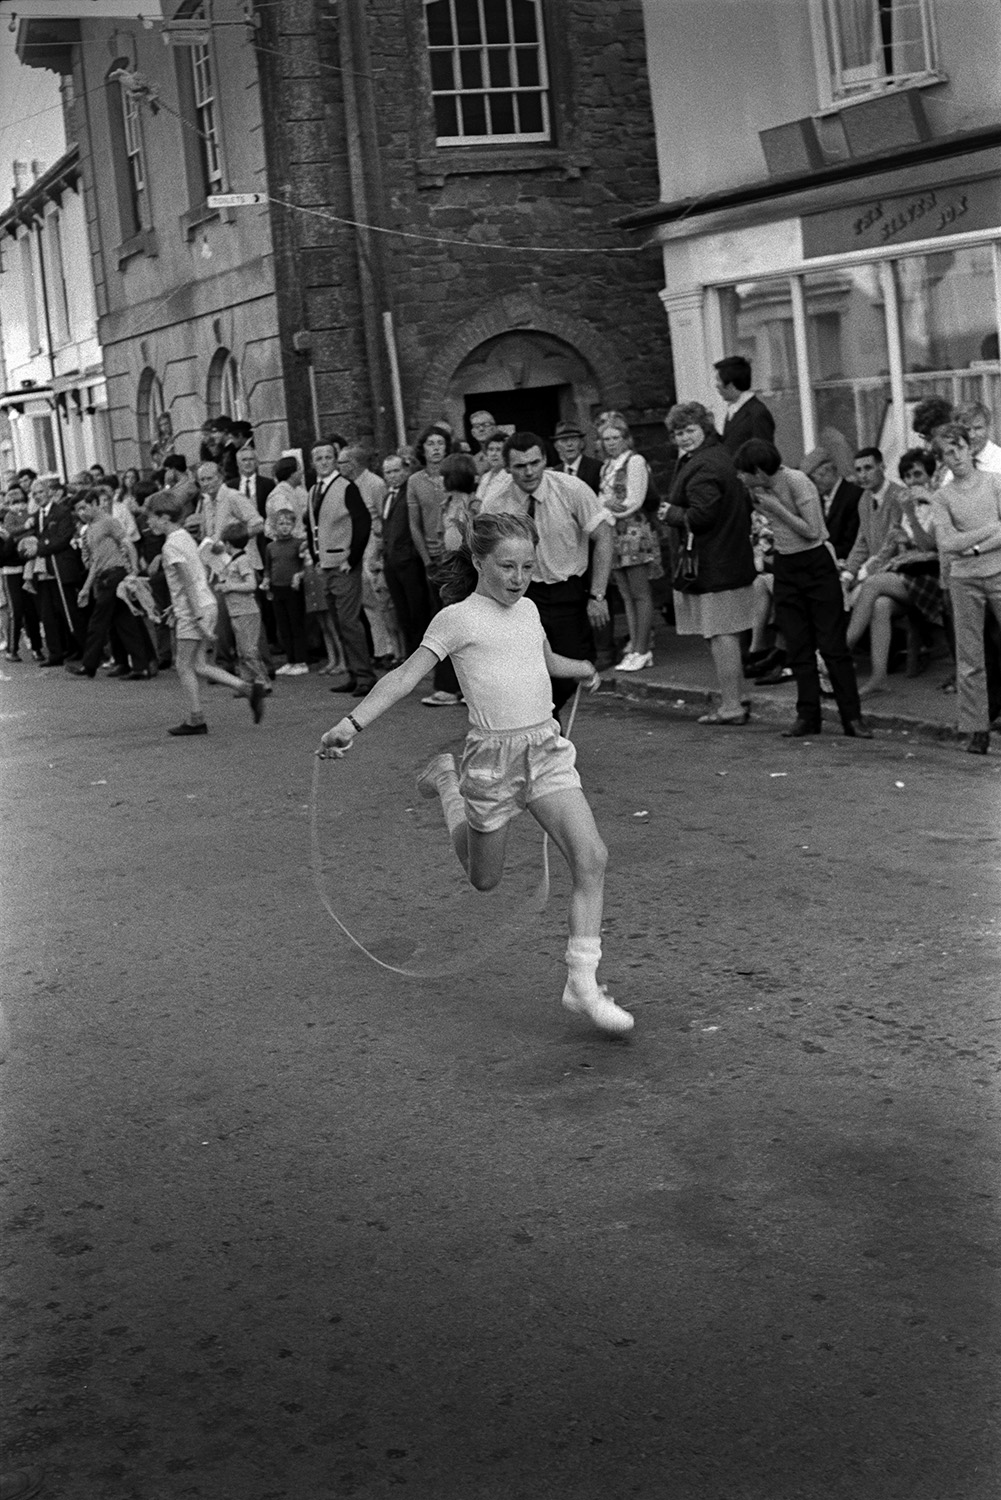 A girl competing in a skipping race through  a street at Chulmleigh Fair with spectators watching.